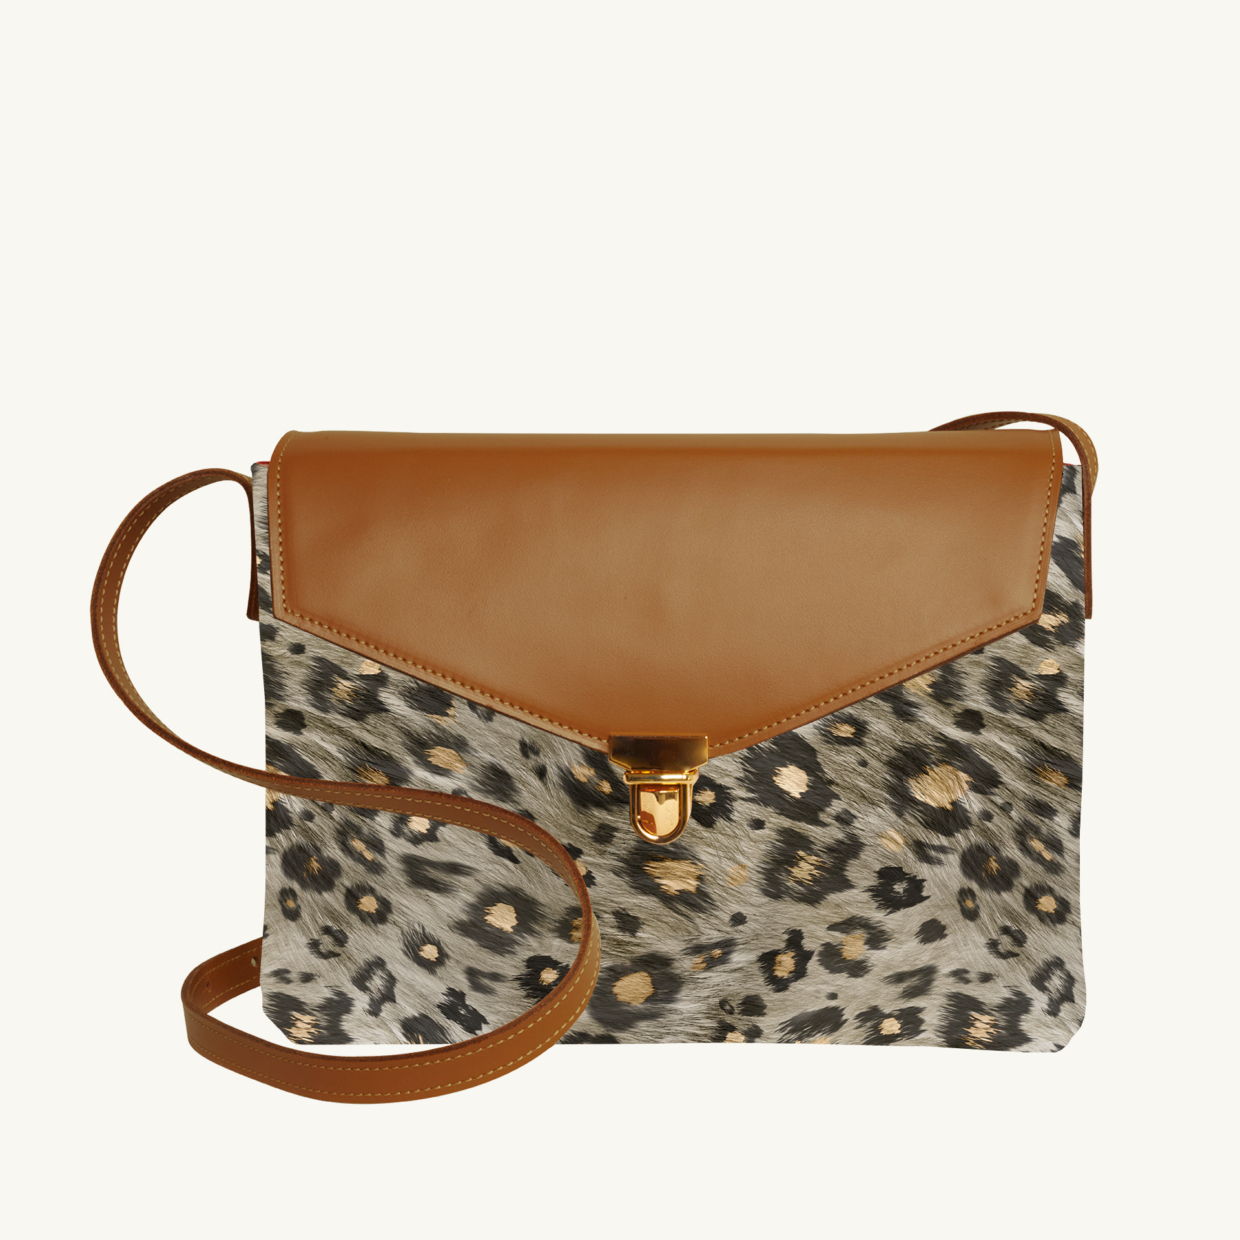 Purse Sauvage N°21 Beige - Camel leather